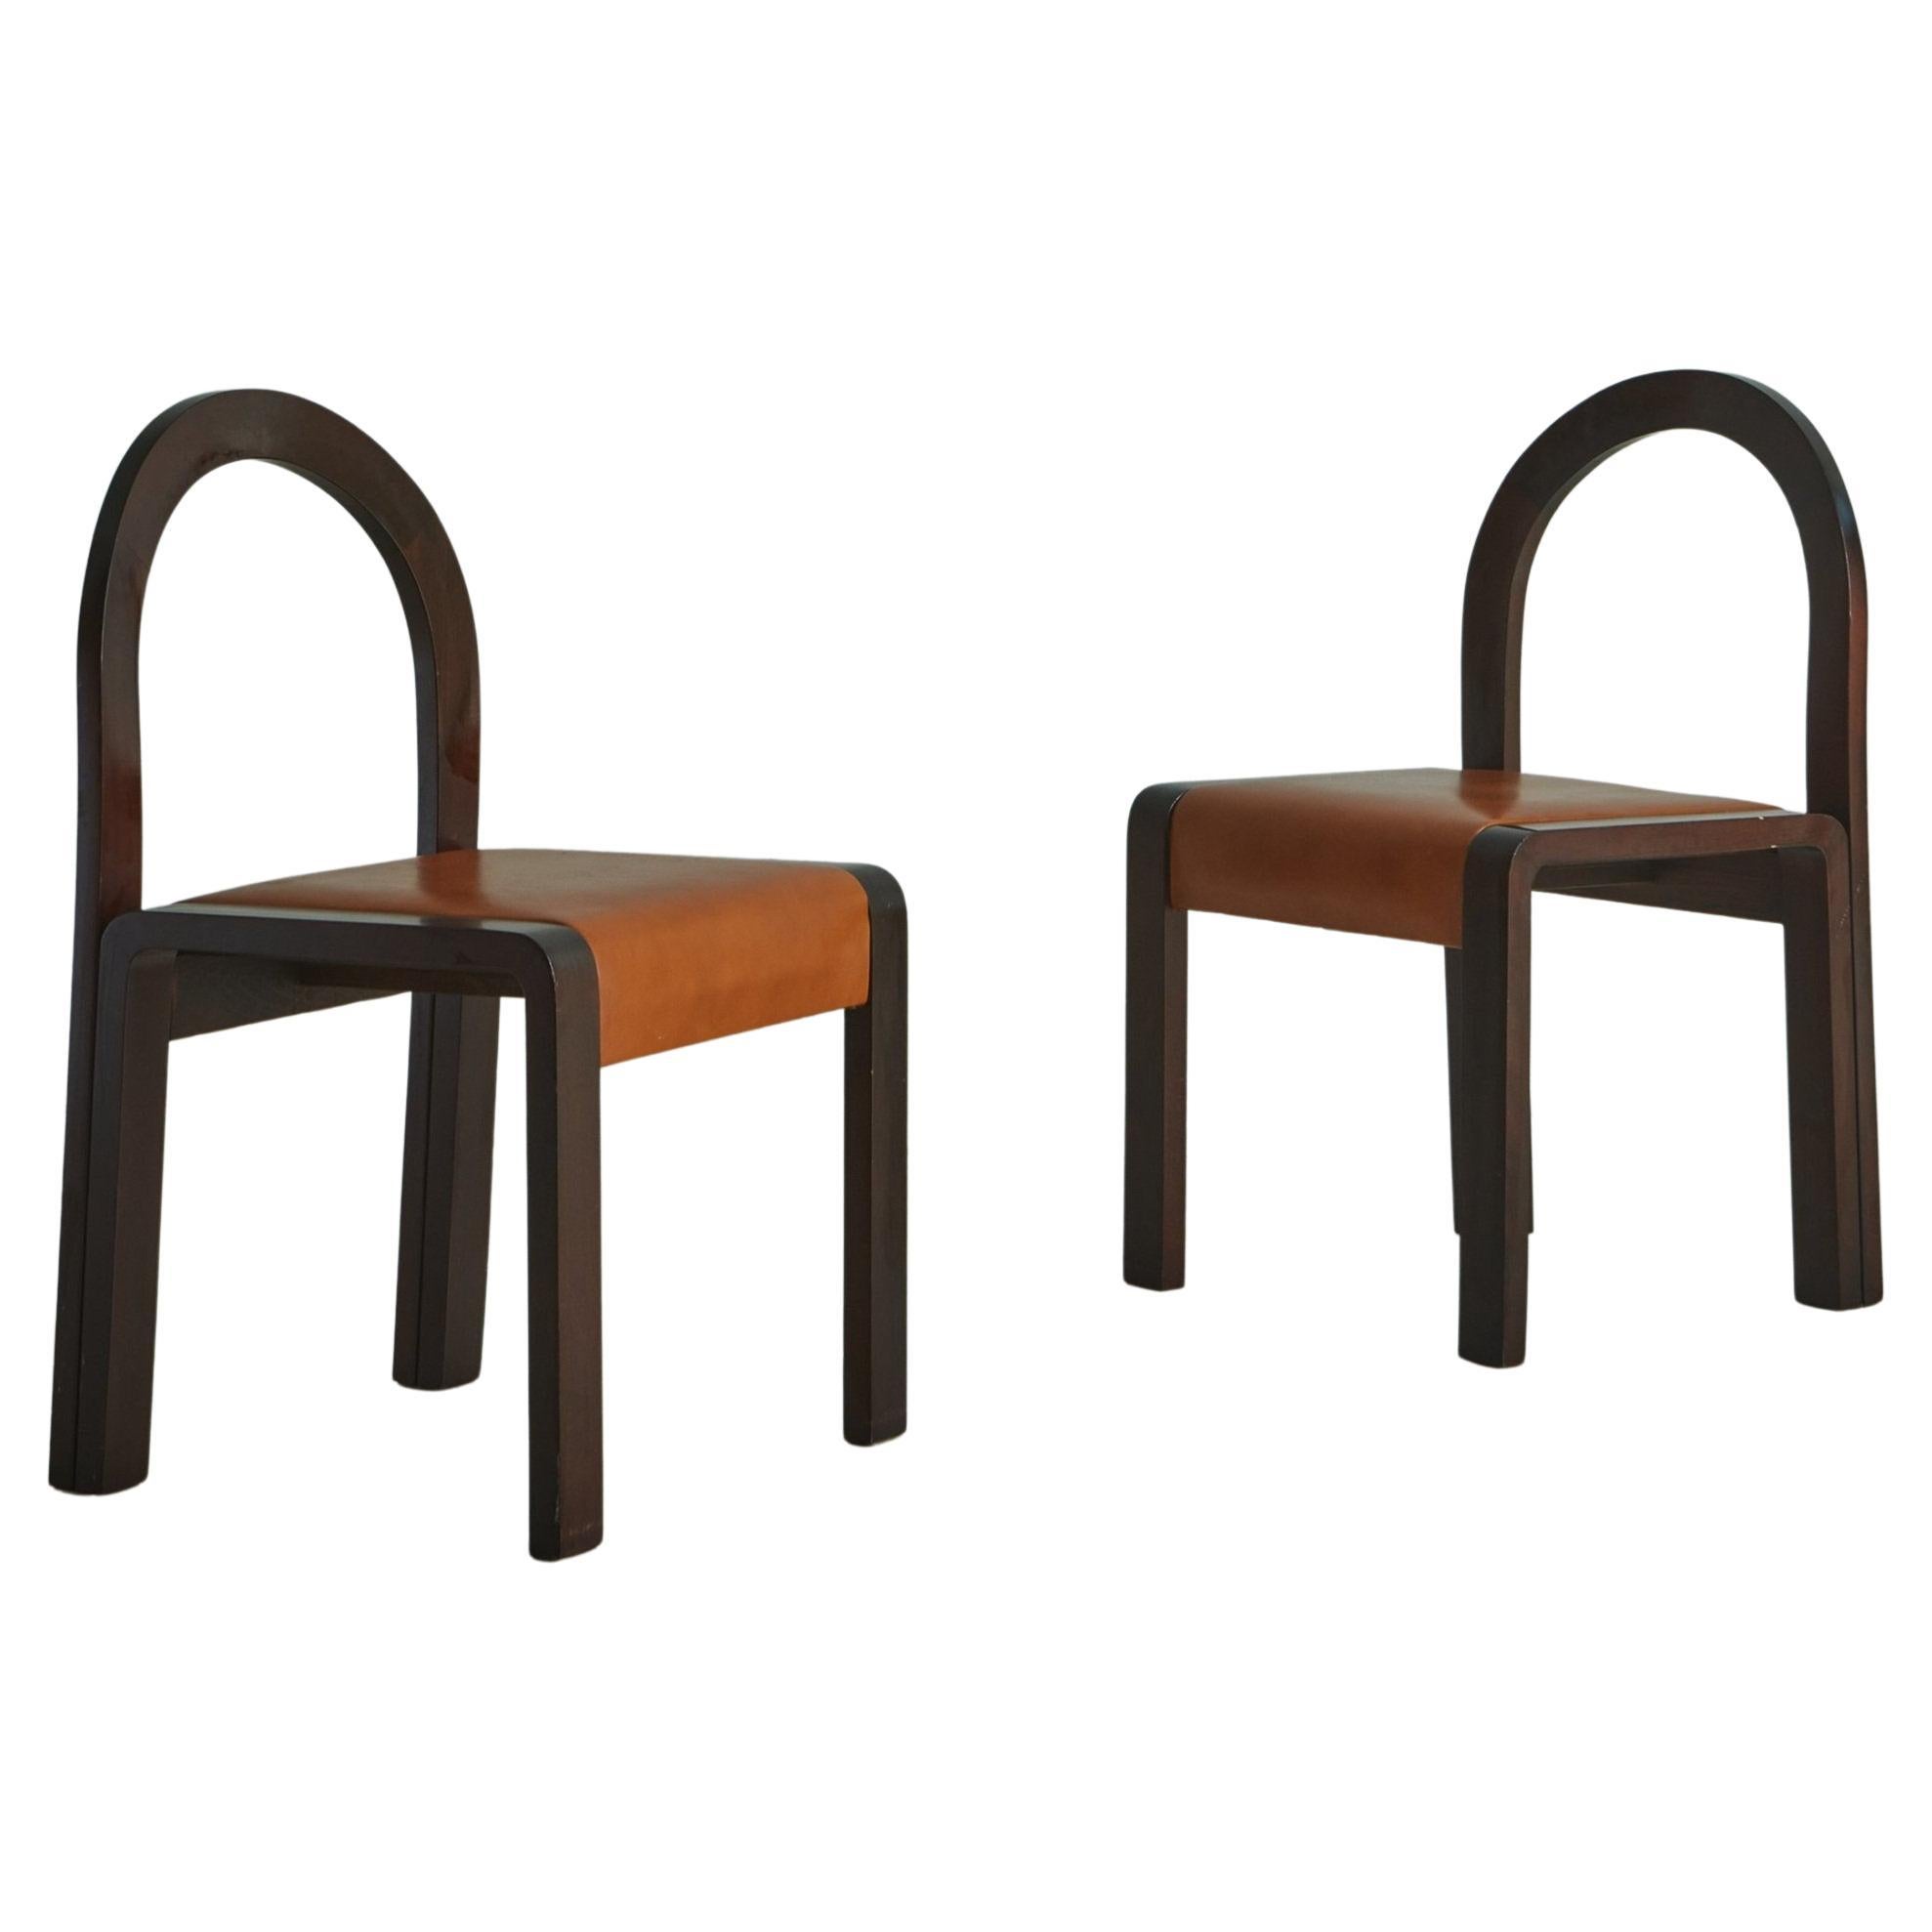 Set of 4 Bentwood Dining Chairs with Cognac Leather Seats, Italy 1980s